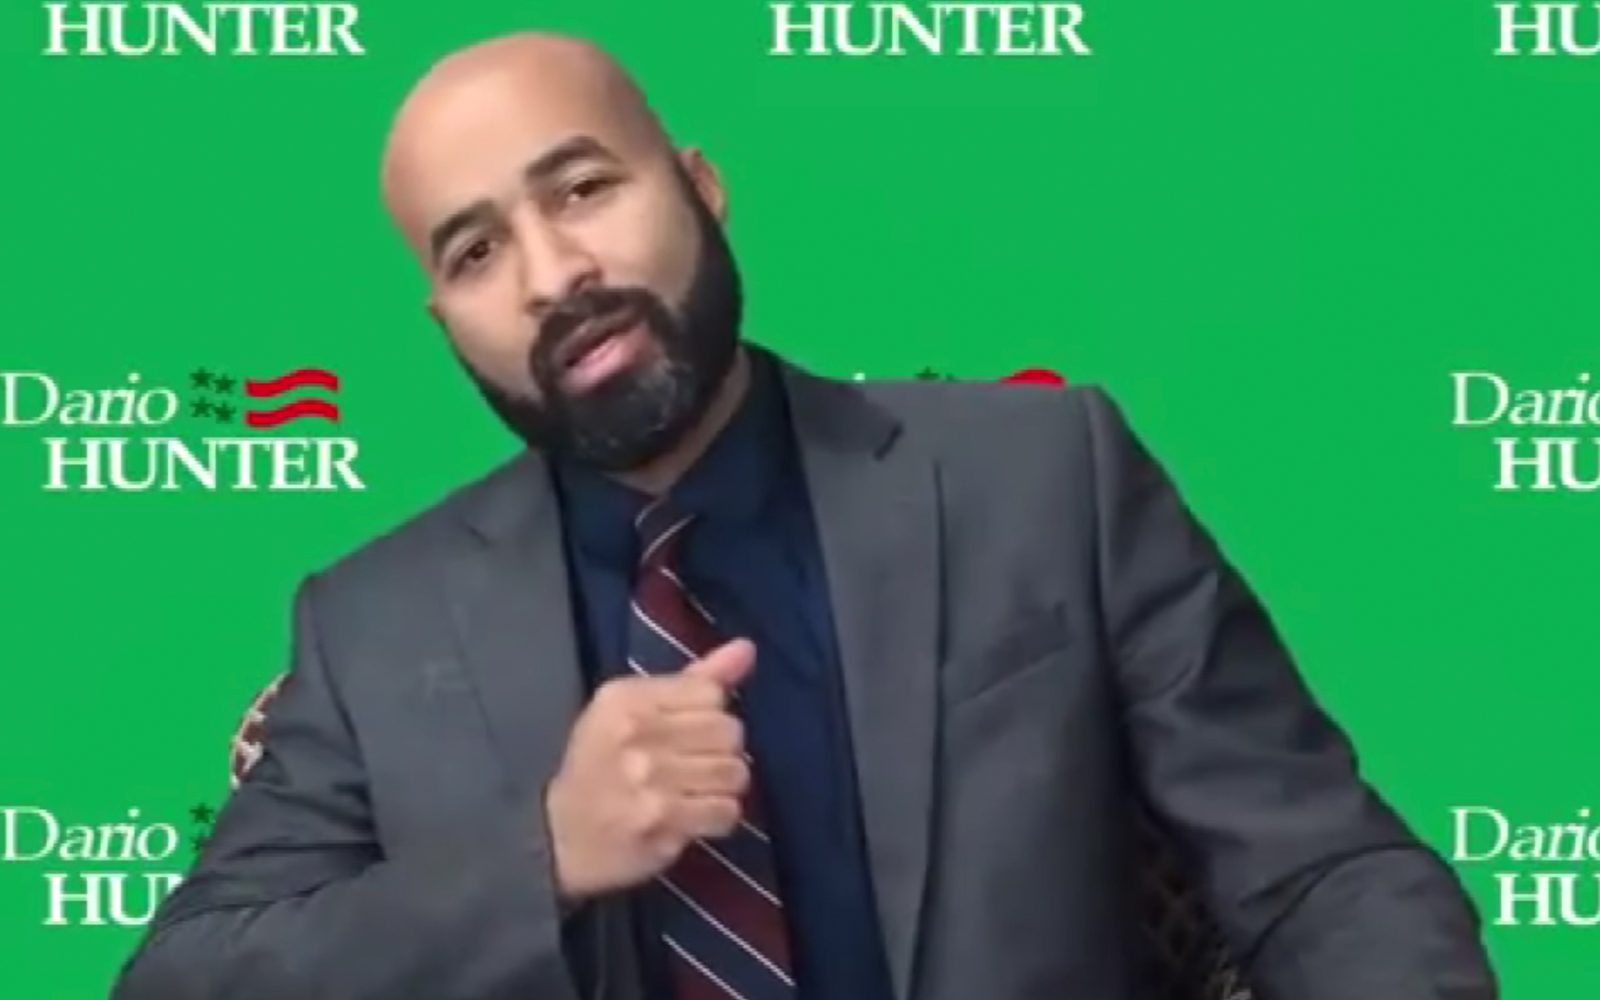 Is 'Hunters' basically Jewsploitation? A journalist and a rabbi